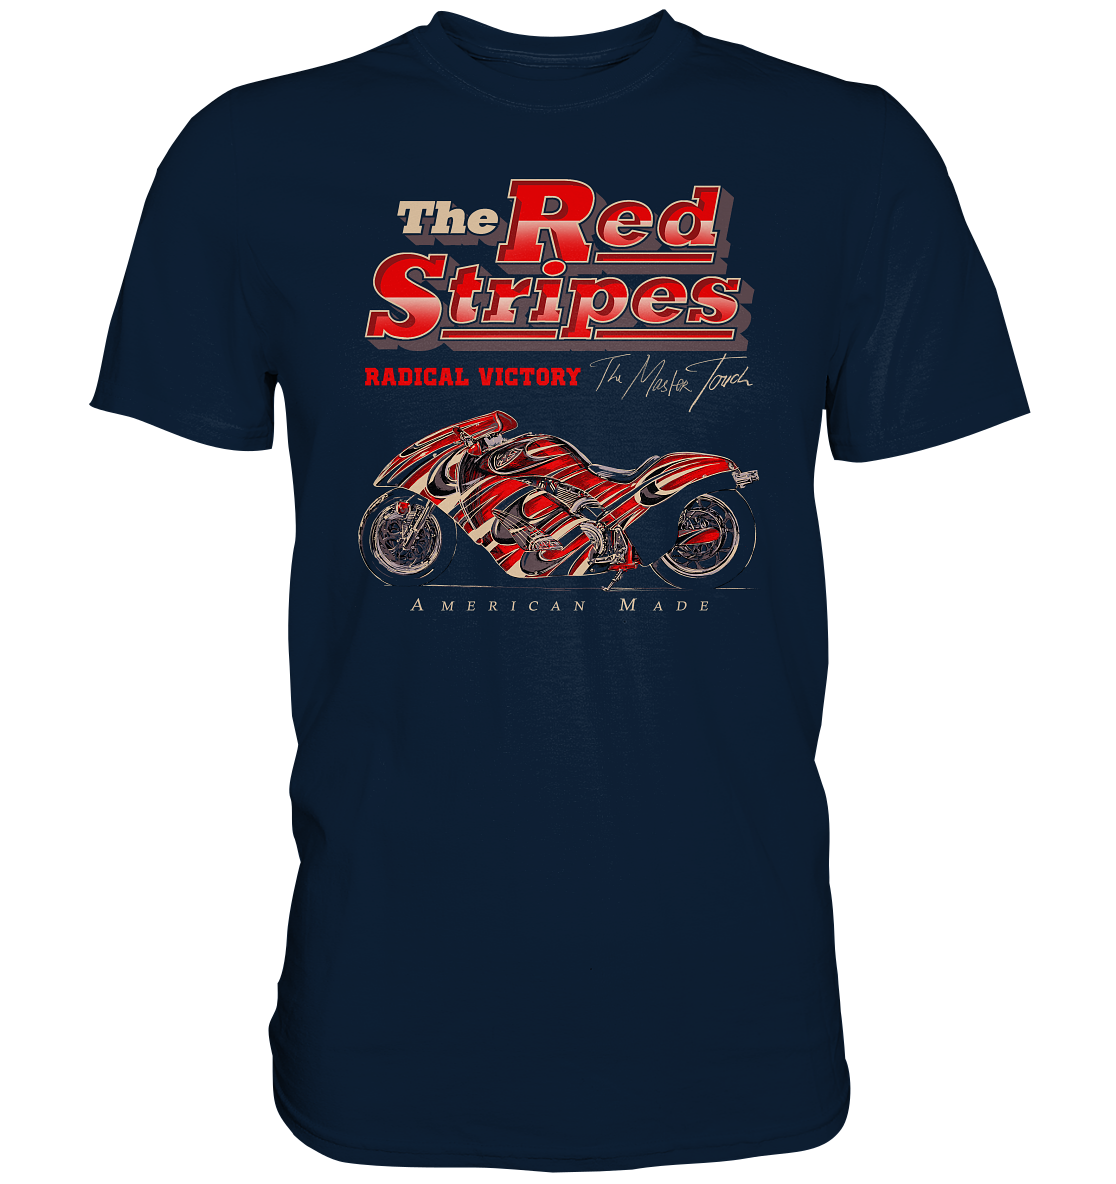 The red stripes, american style - Premium unisex Shirt